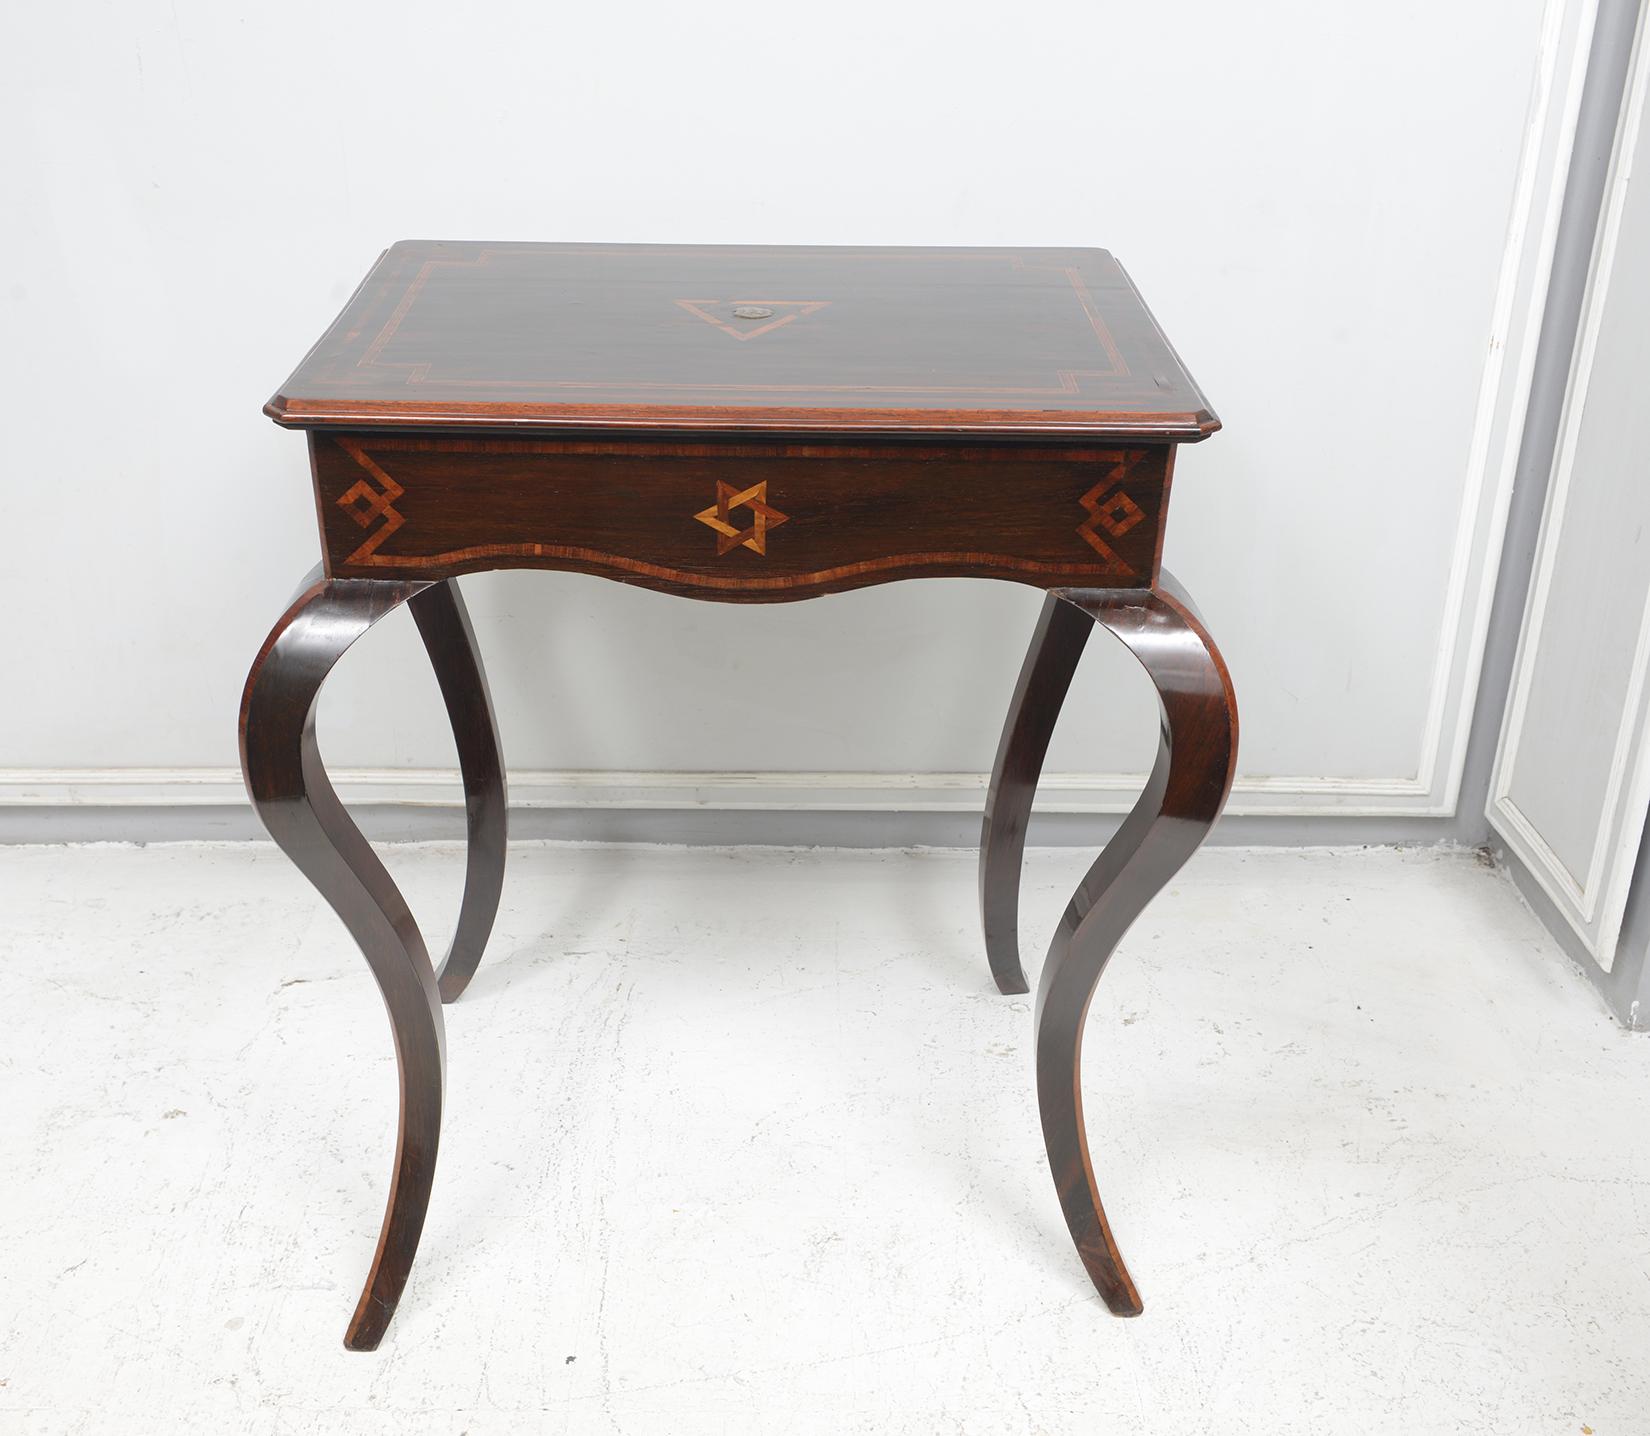 Antique Northern Italian table on Sabre legs. 
Table is handcrafted of rosewood with different types of wood: rosewood, mahogany and satinwood inlay.

